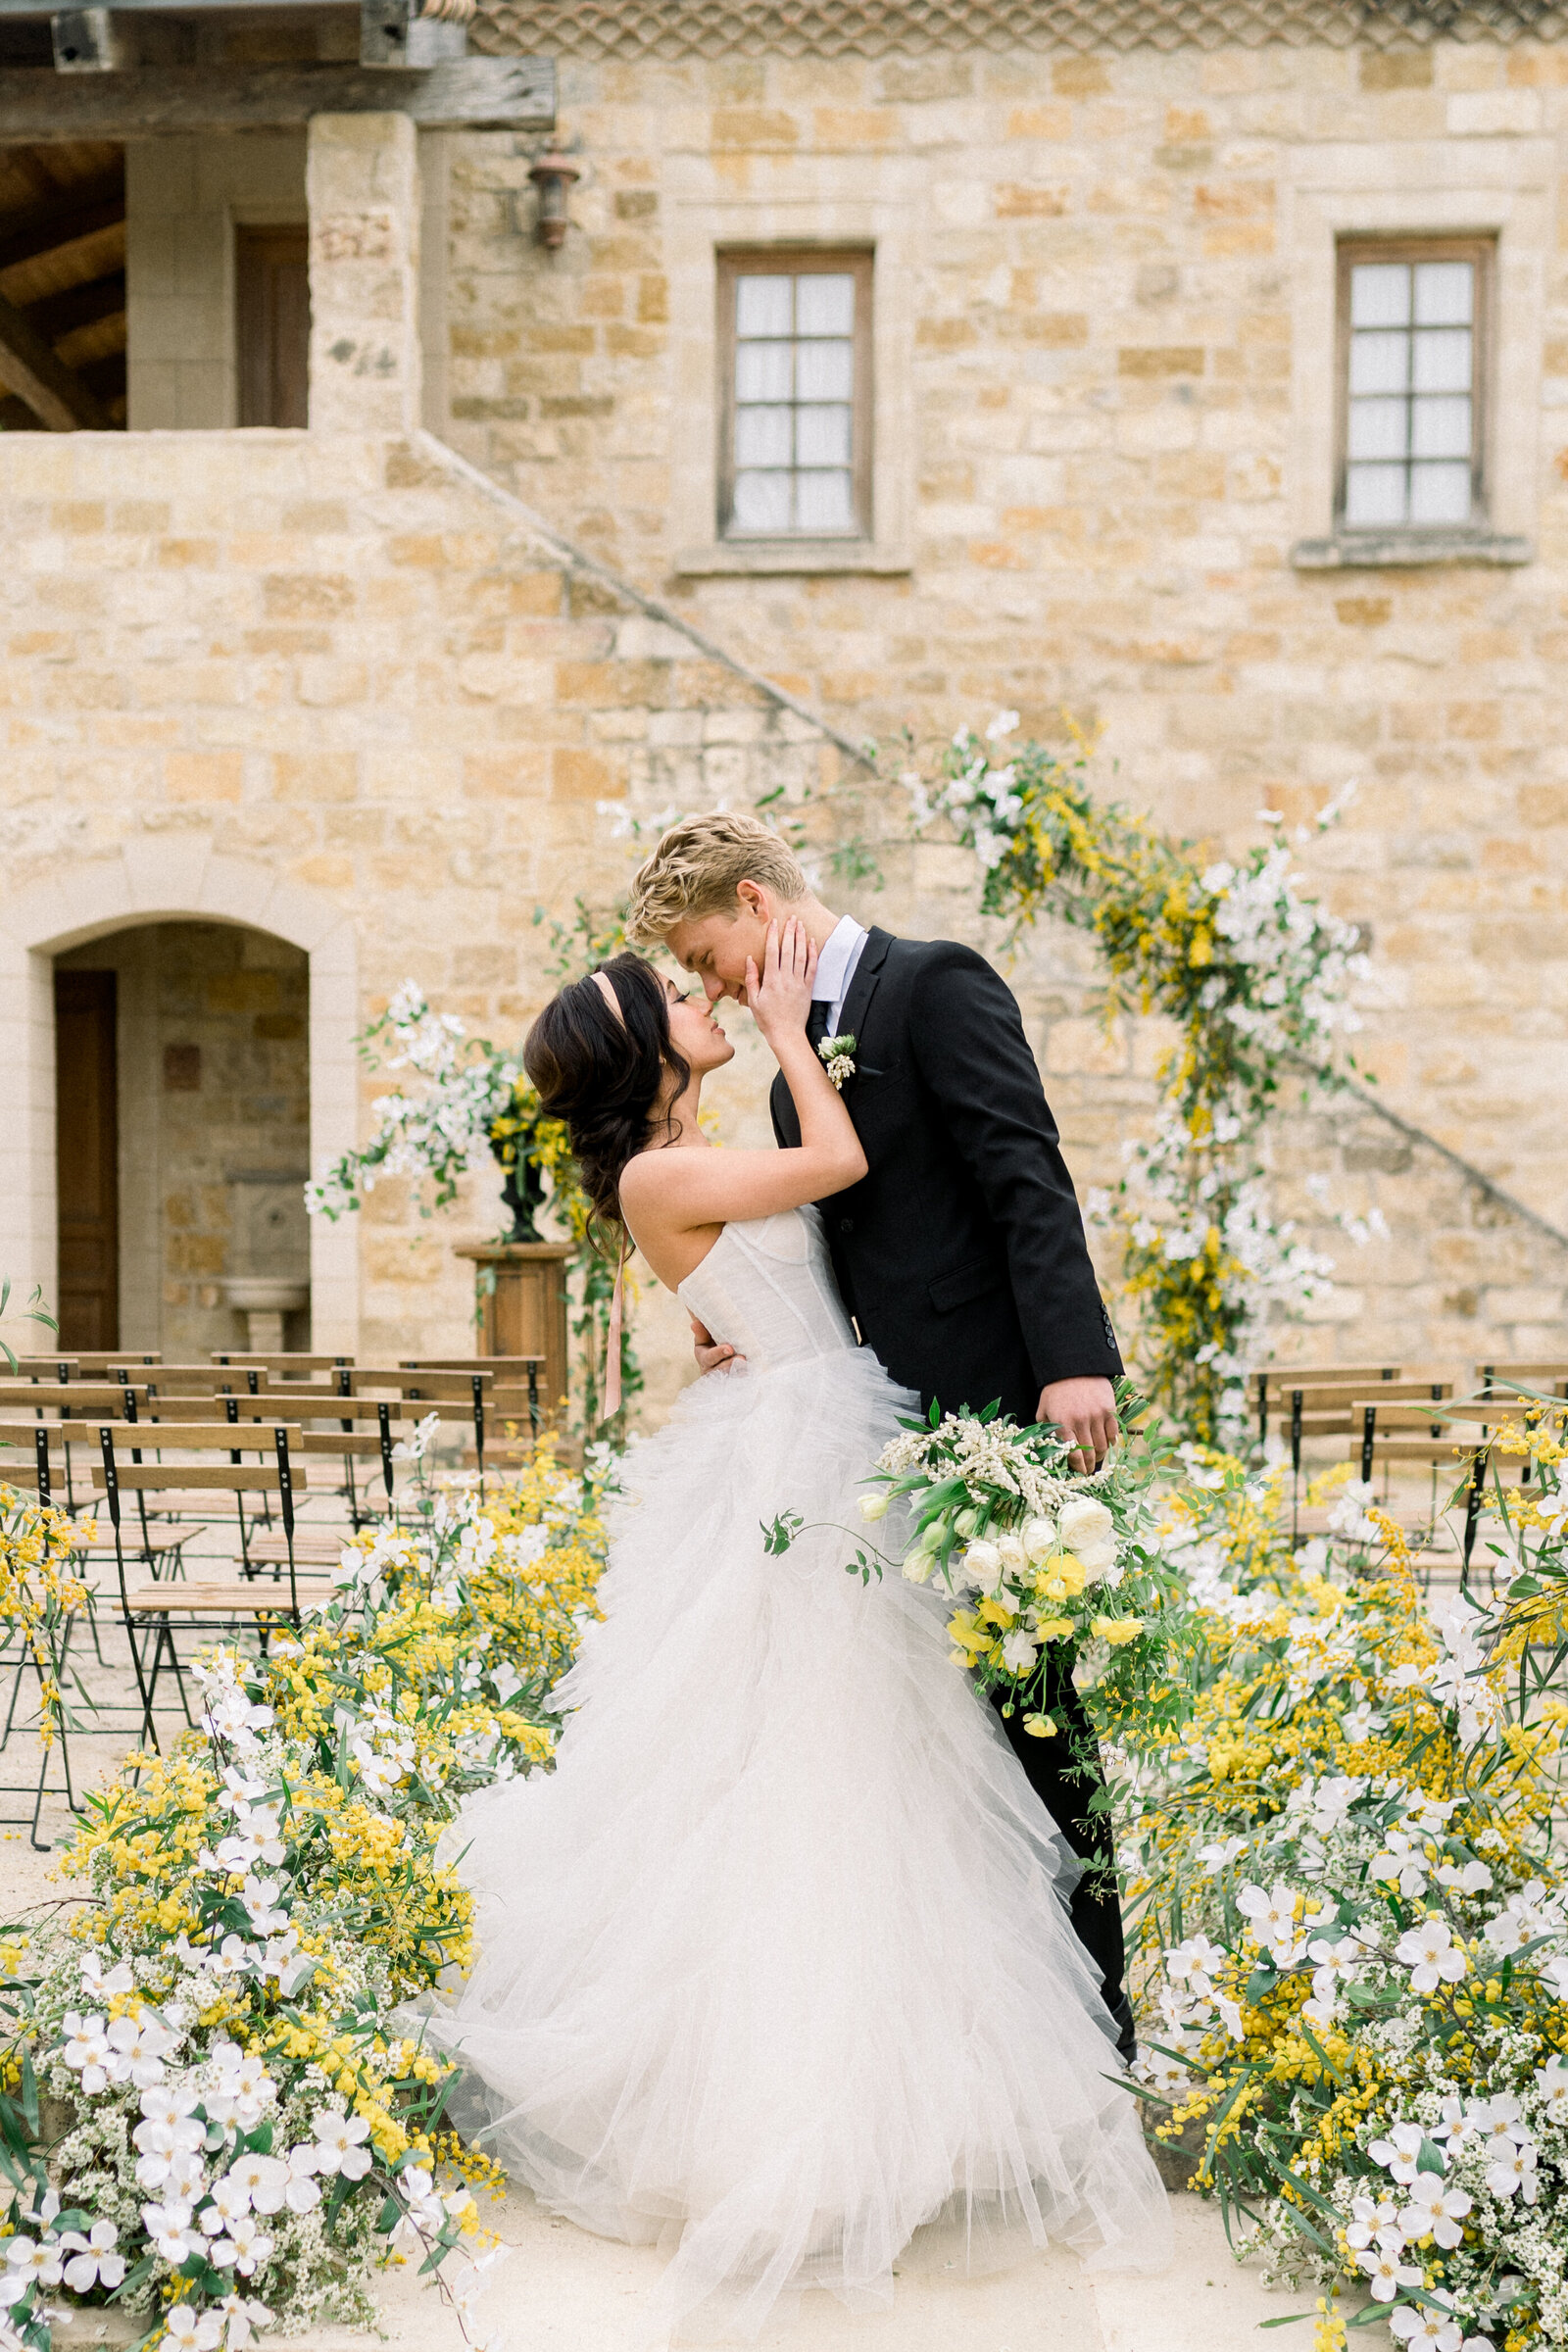 Capturing a magical moment at Sunstone Winery in Santa Ynez, CA, this image by Tiffany Longeway showcases a bride and groom's first kiss, framed by the vineyard's natural beauty.